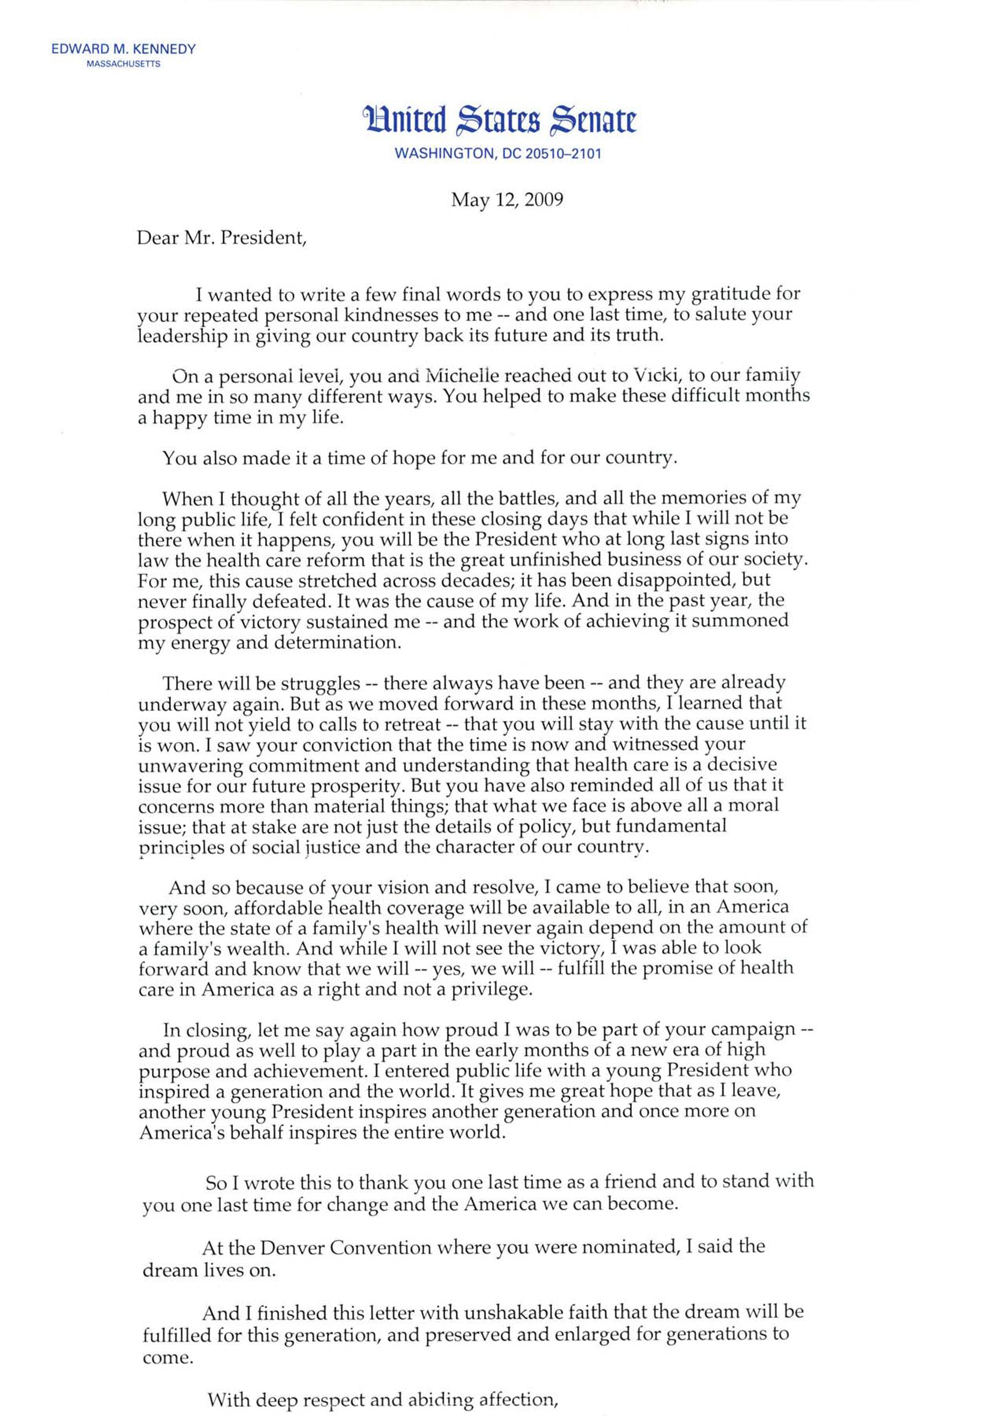 Excerpt from a letter from Edward Kennedy to President Obama: When I thought of all of the years, all of the battles, and all the memories of my long public life, I felt confident in these closing days that while I will not be there when it happens, you will be the President who at long last signs into law the health care reform that is the great unfinished business of our society. For me, this cause stretched across decades; it has been disappointed, but never fully defeated. It was the cause of my life. And in the past year, the prospect of victory sustained me — and the work of achieving it summoned my energy and determination. There will be struggles — there always have been — and they are already underway again. But as we moved forward in these months, I learned that you will not yield to calls to retreat — that you will stay with the cause until it is won. I saw your conviction that the time is now and witnessed your unwavering commitment and understanding that health care is a decisive issue for our future prosperity. But you have also reminded all of us that it concerns more than material things; that what we face is above all a moral issue; that at stake are not just the details of policy, but fundamental principles of social justice and the character of our country. And so because of your vision and resolve, I came to believe that soon, very soon, affordable health coverage will be available to all, in an America where the state of a family's health will never again depend on the amount of a family's wealth. And while I will not see the victory, I was able to look forward and know that we will — yes, we will — fulfill the promise of health care in America as a right and not a privilege.